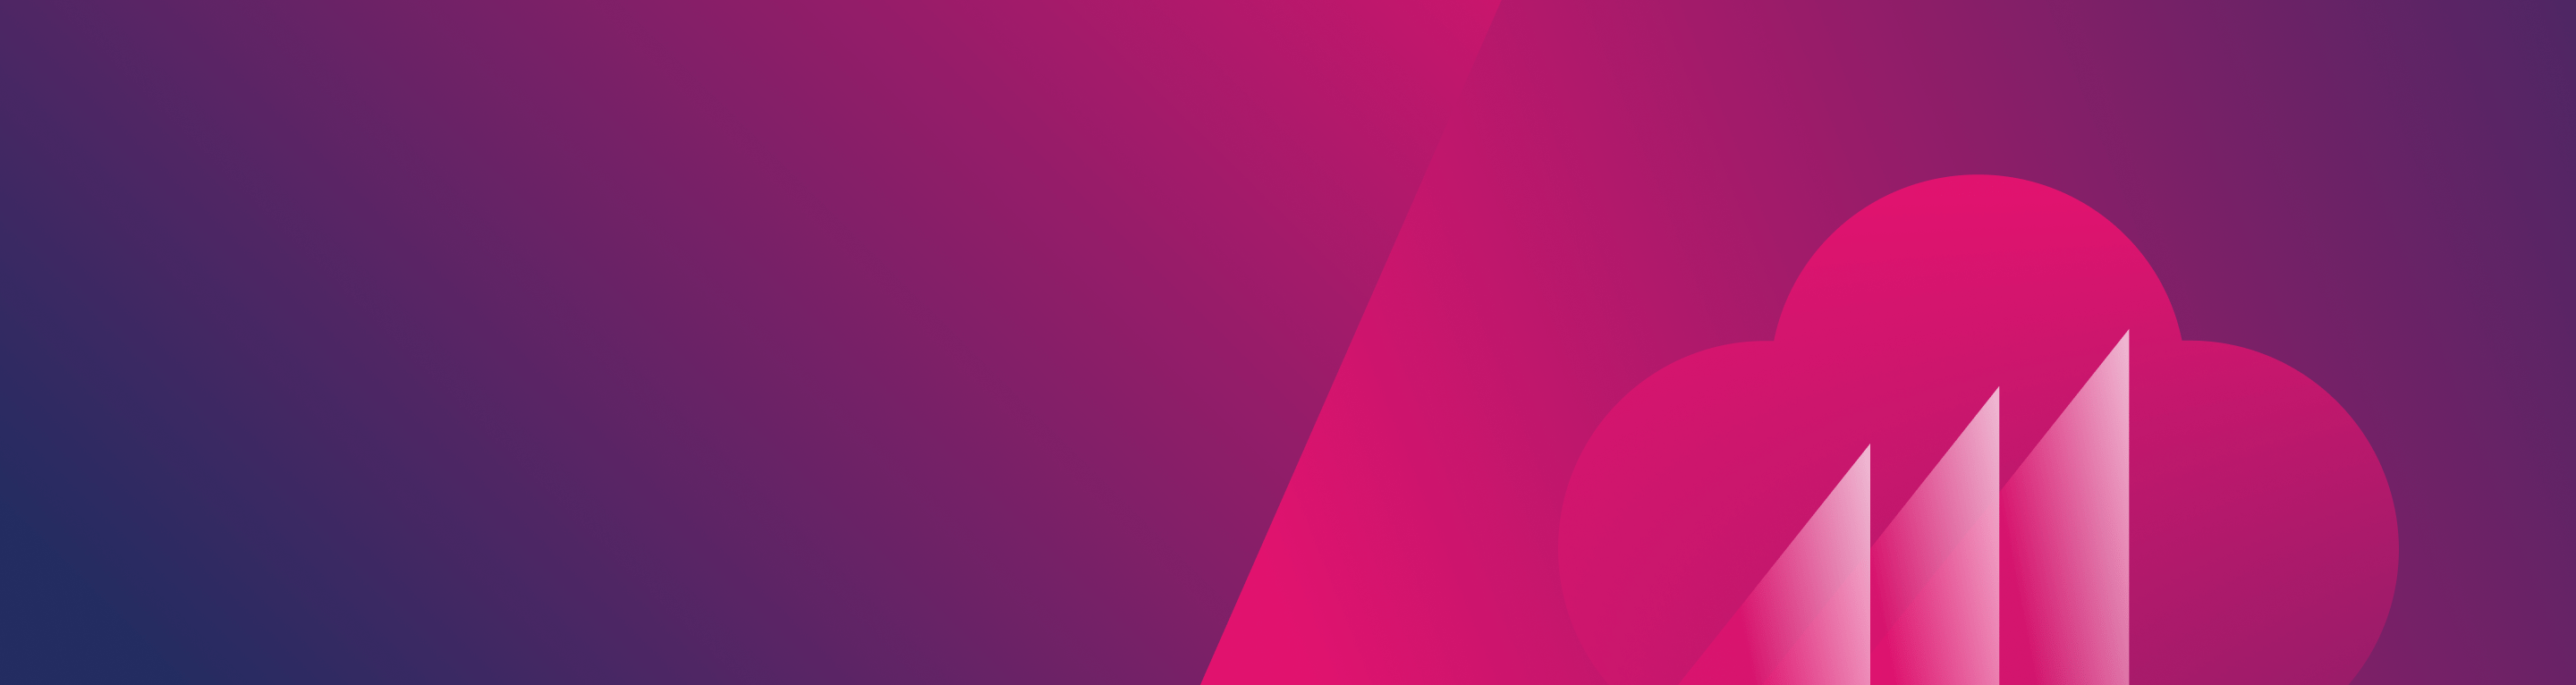 Navy and Pink Gradients with Marketing Cloud Logo